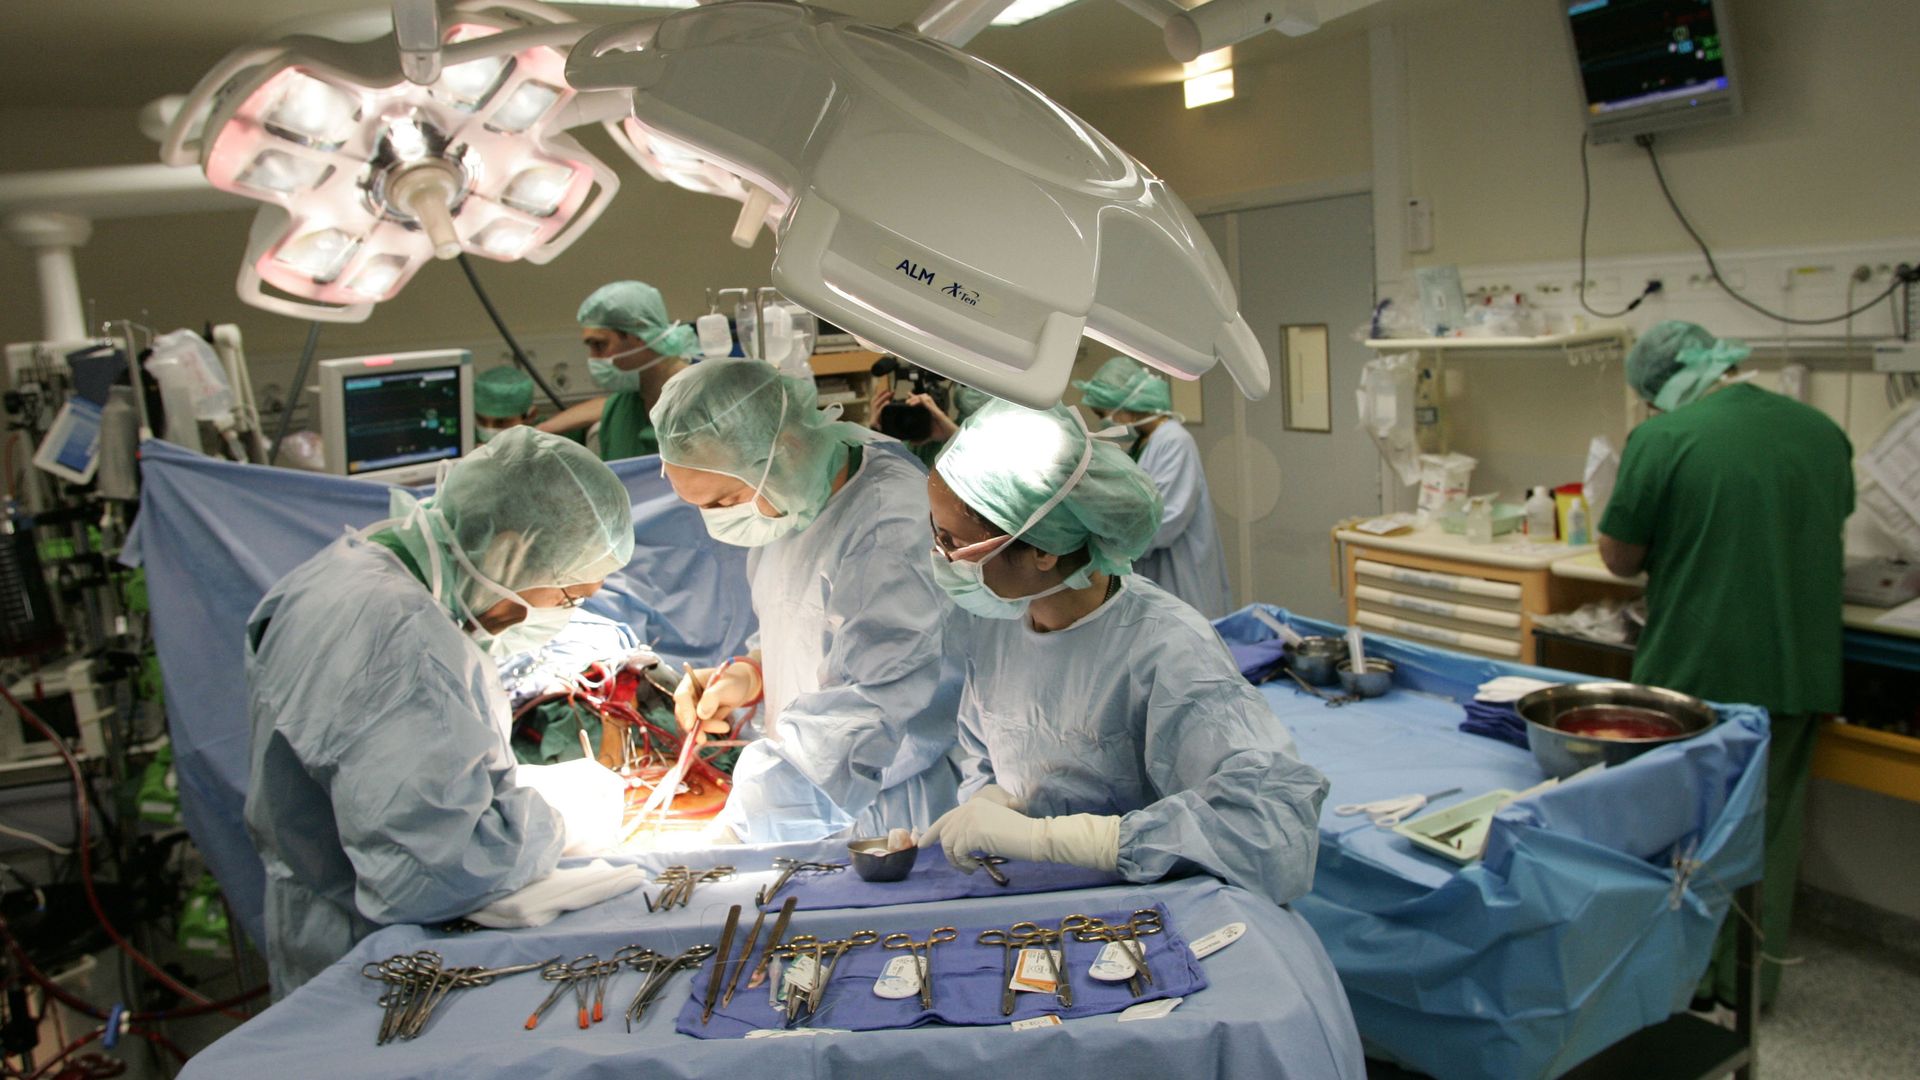 Three doctors in gowns surround a patient on an operating table.